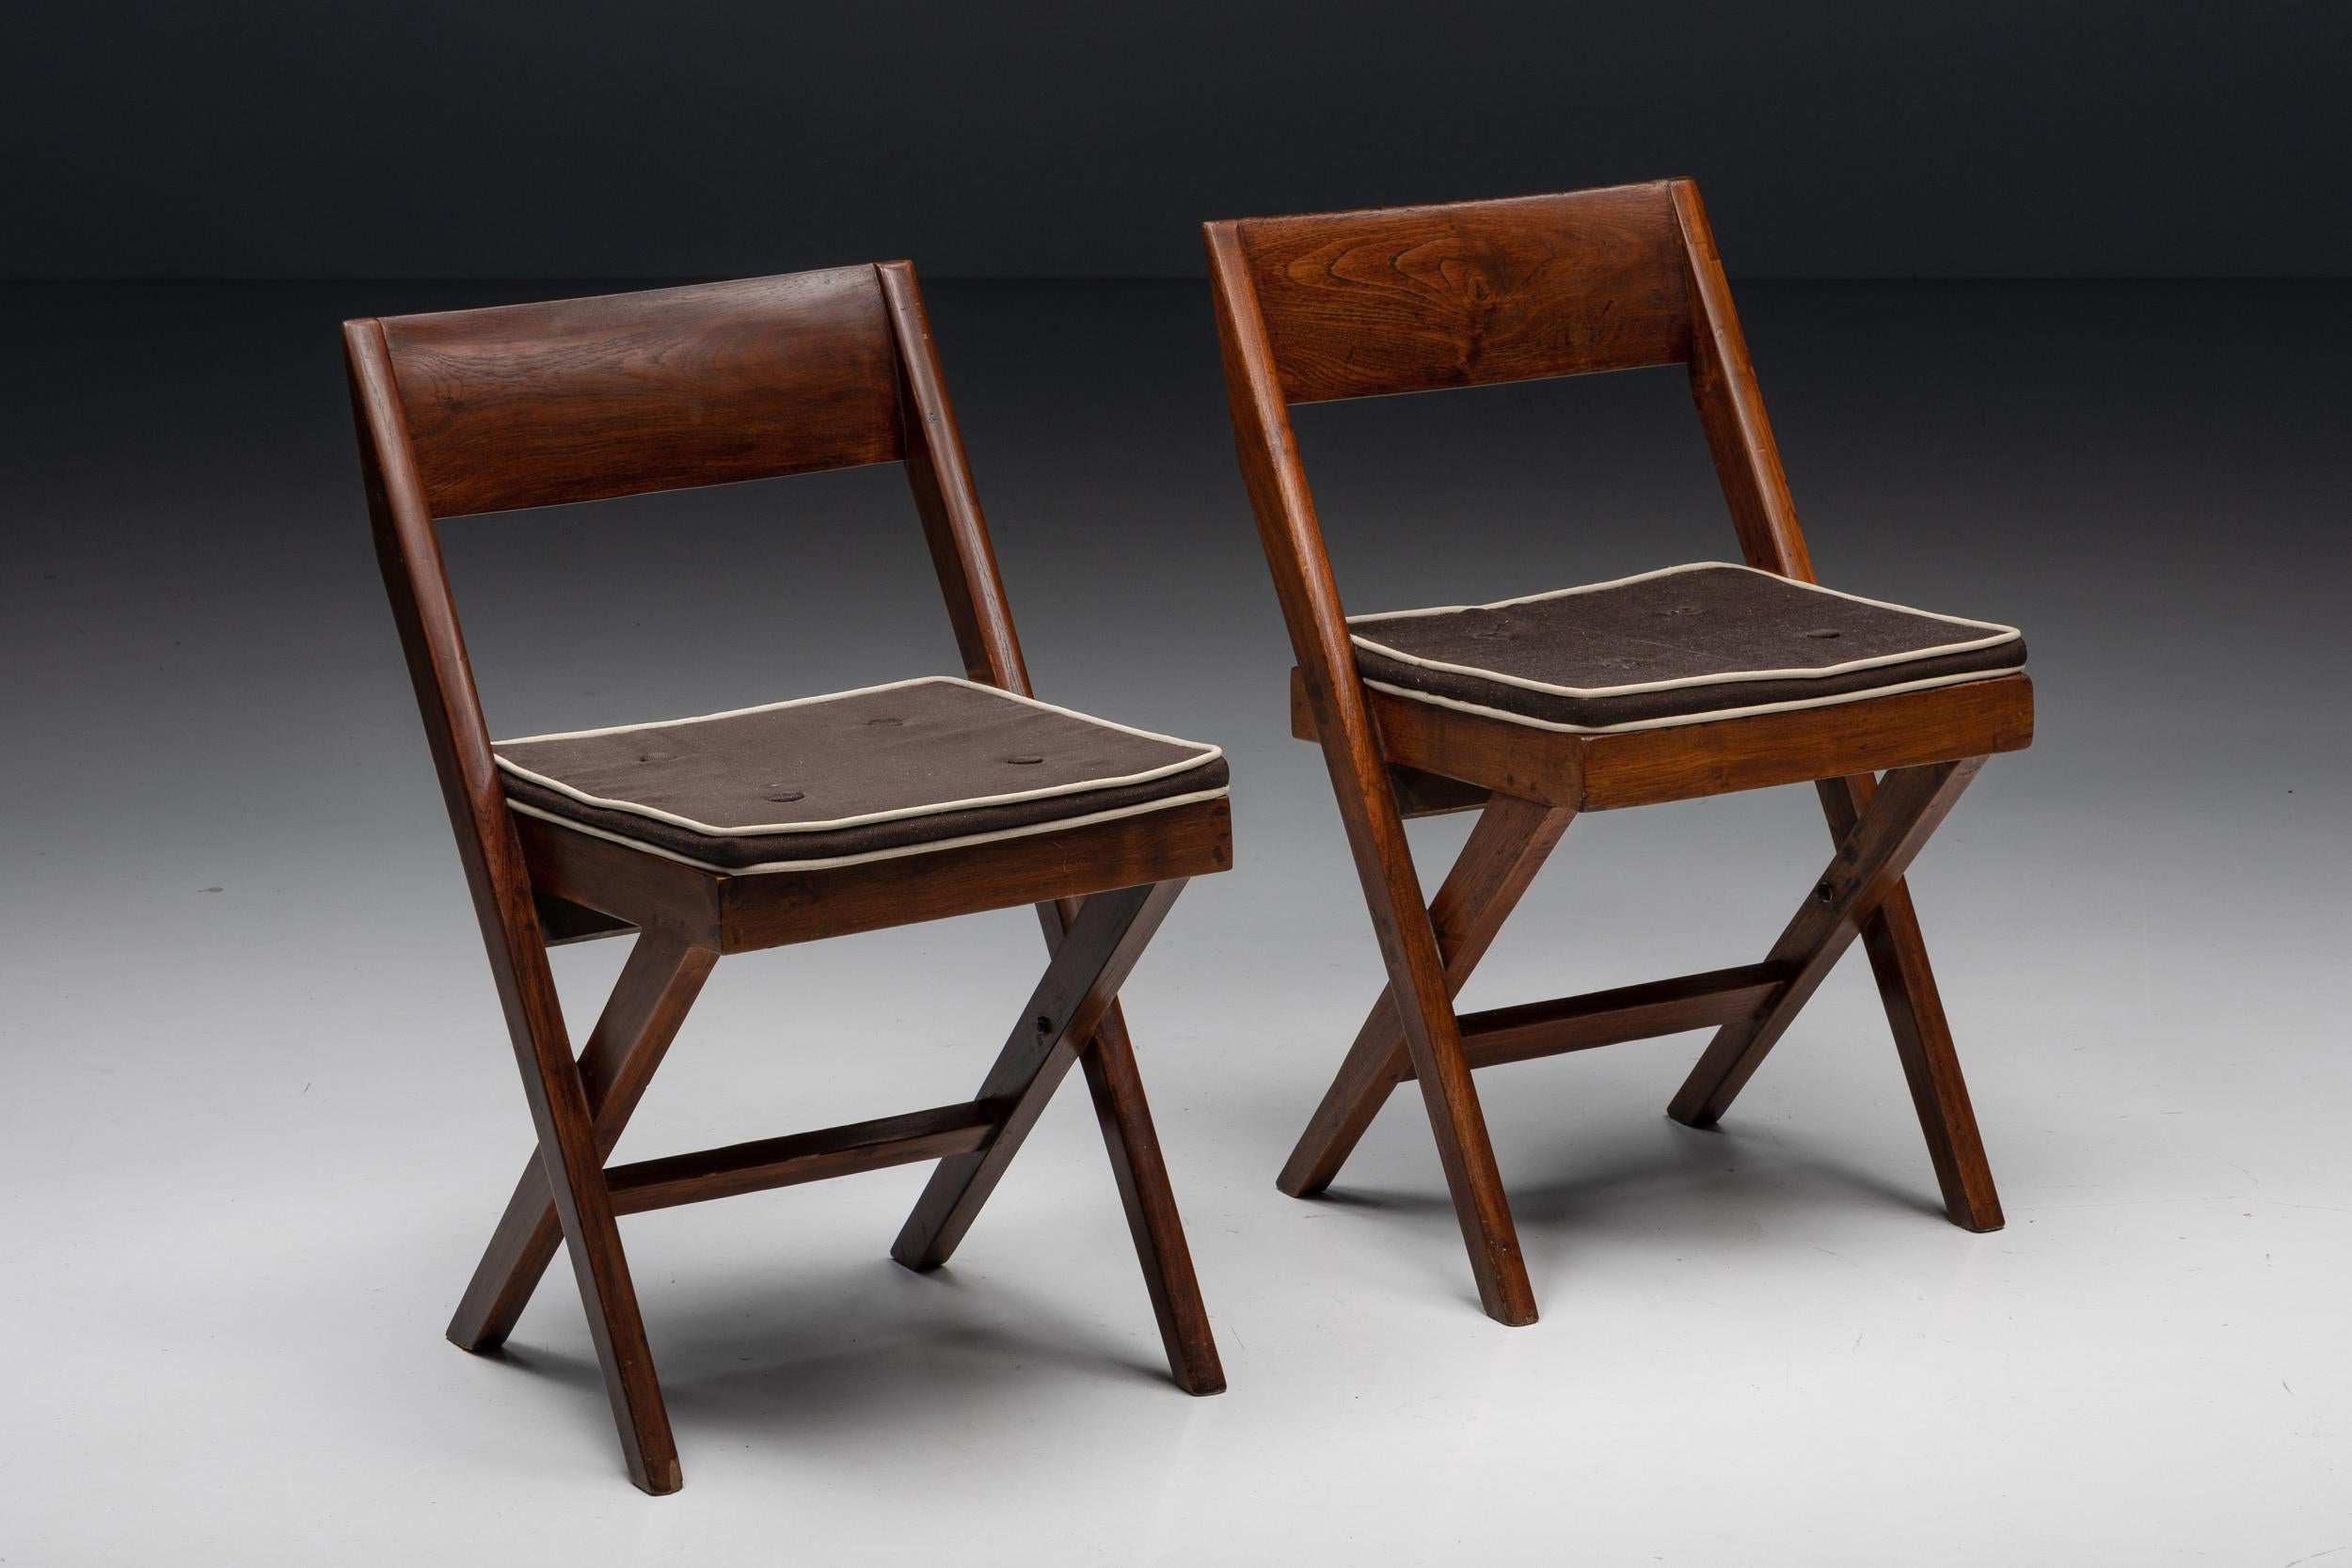 Indian Set of Library Chairs by Pierre Jeanneret, Chandigarh, 1950s For Sale